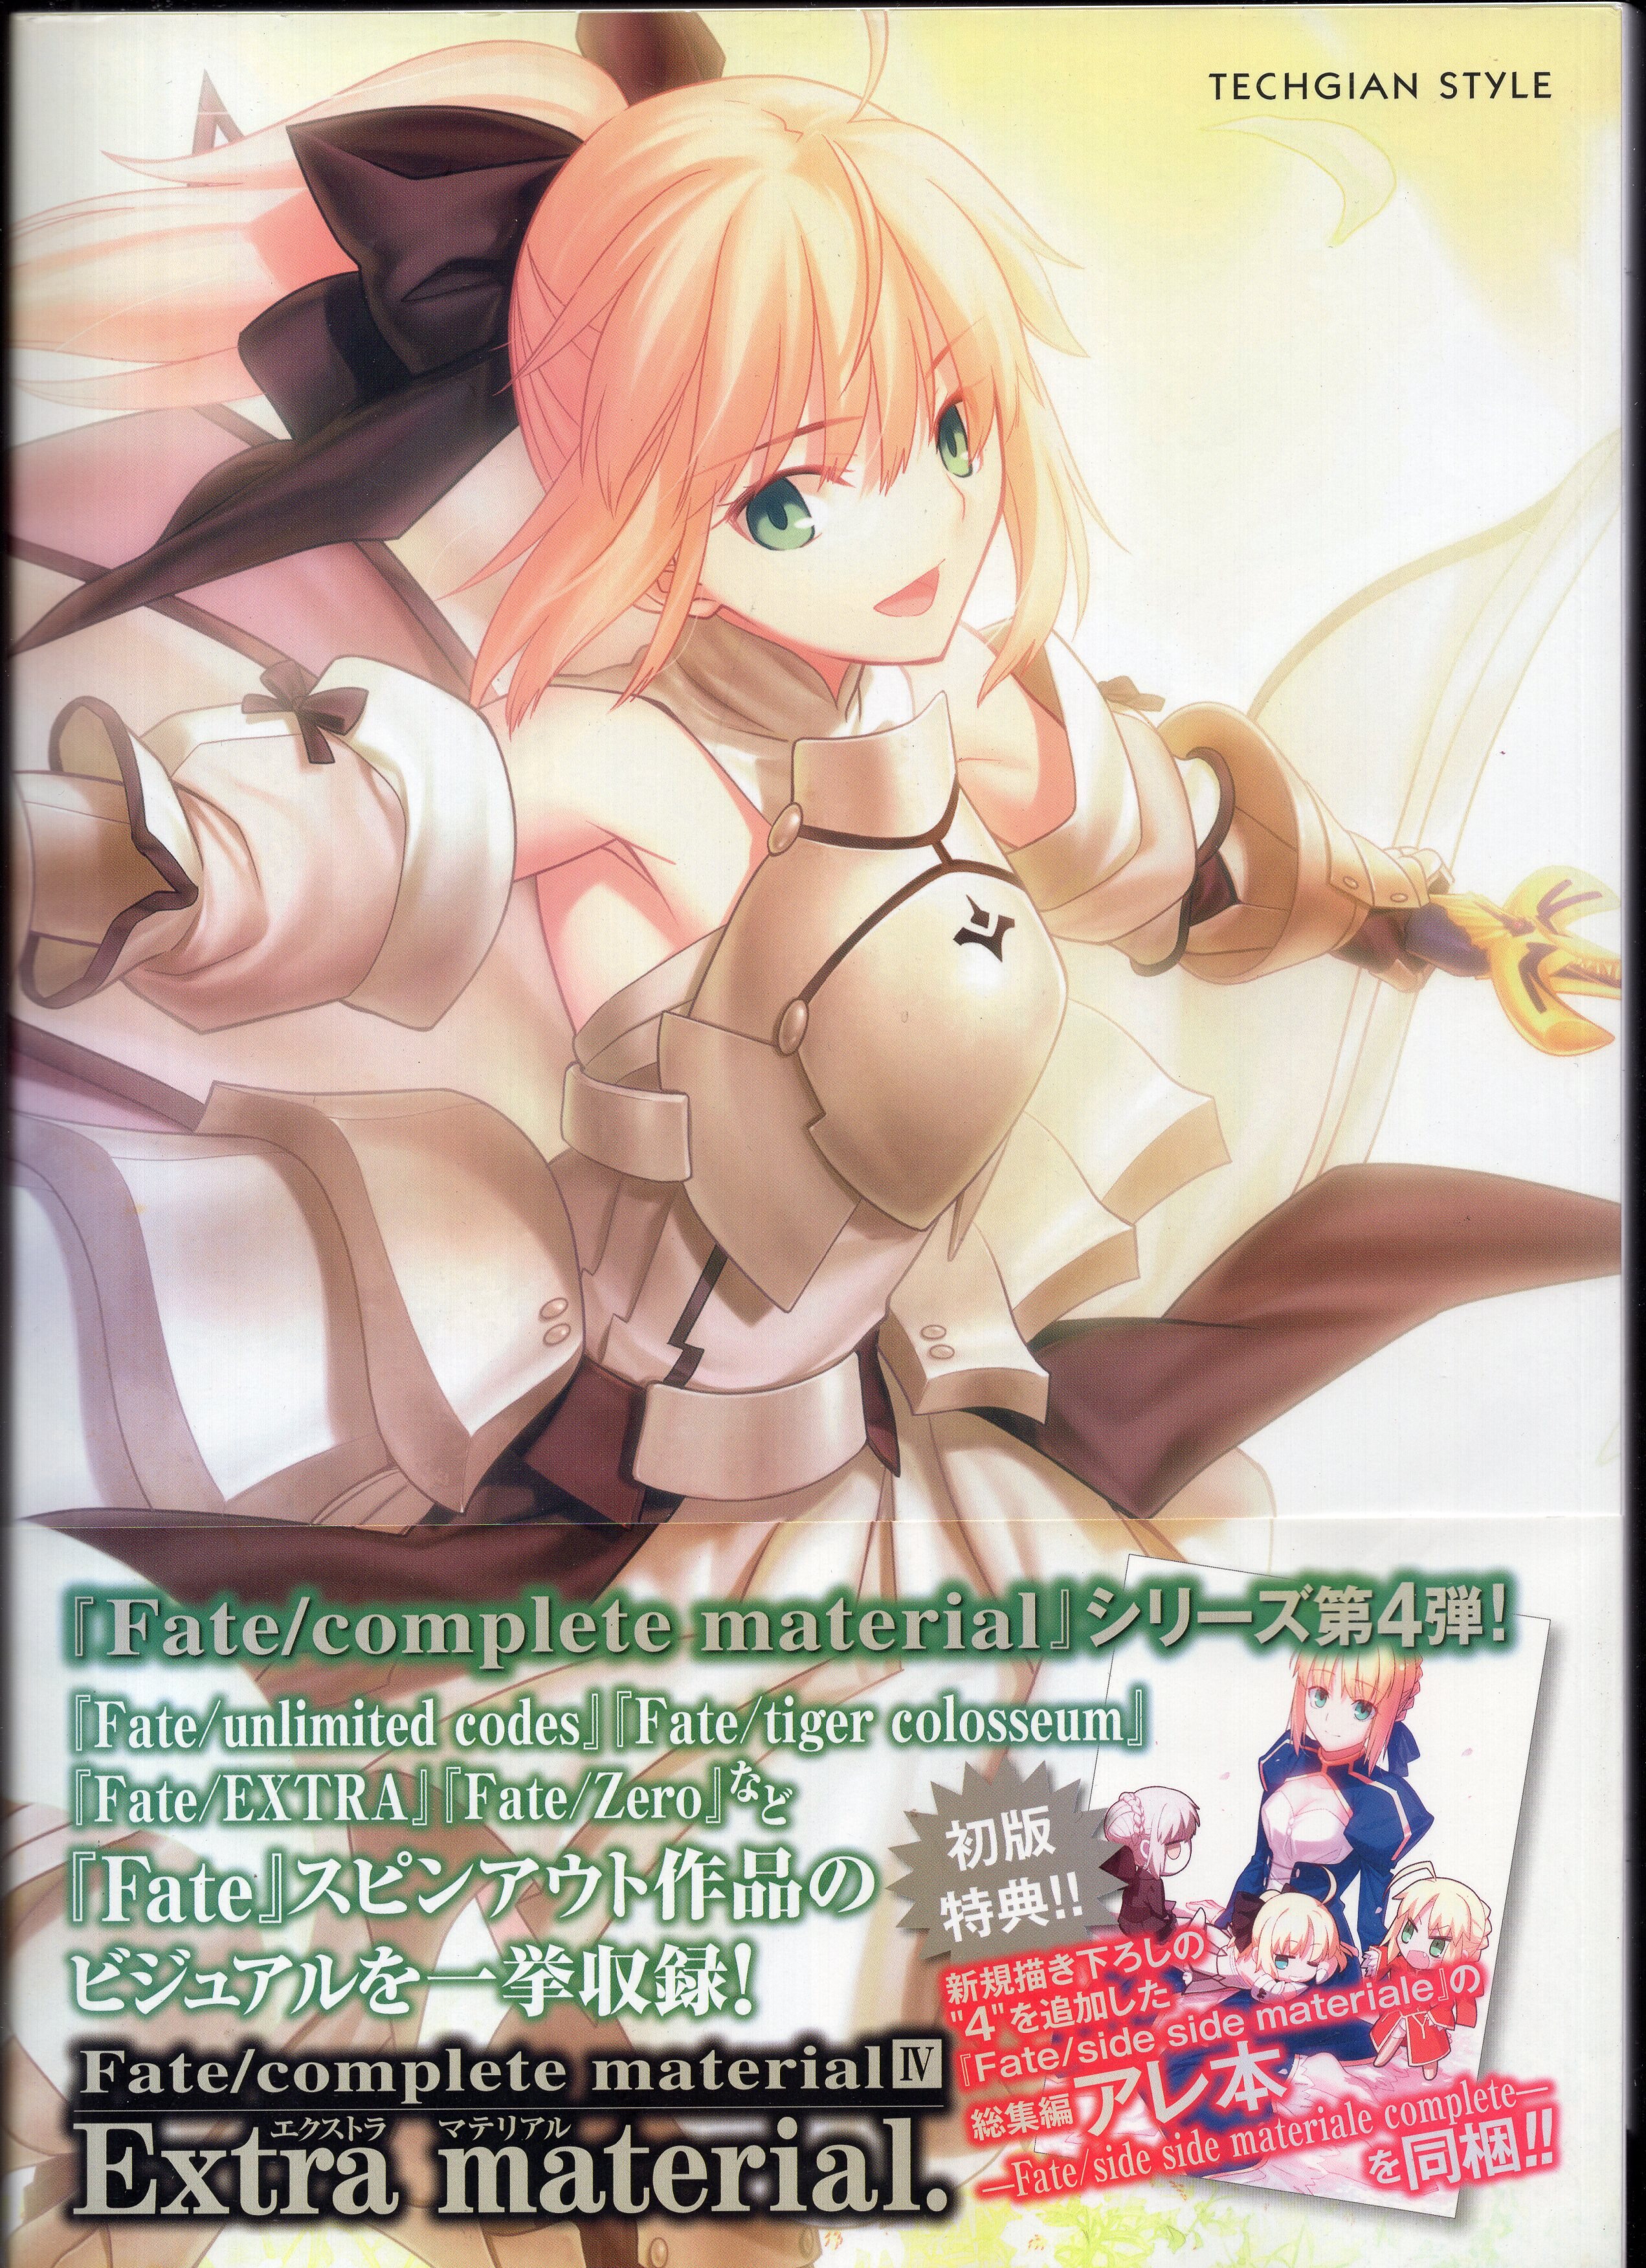 Fate/complete material IV Extra material